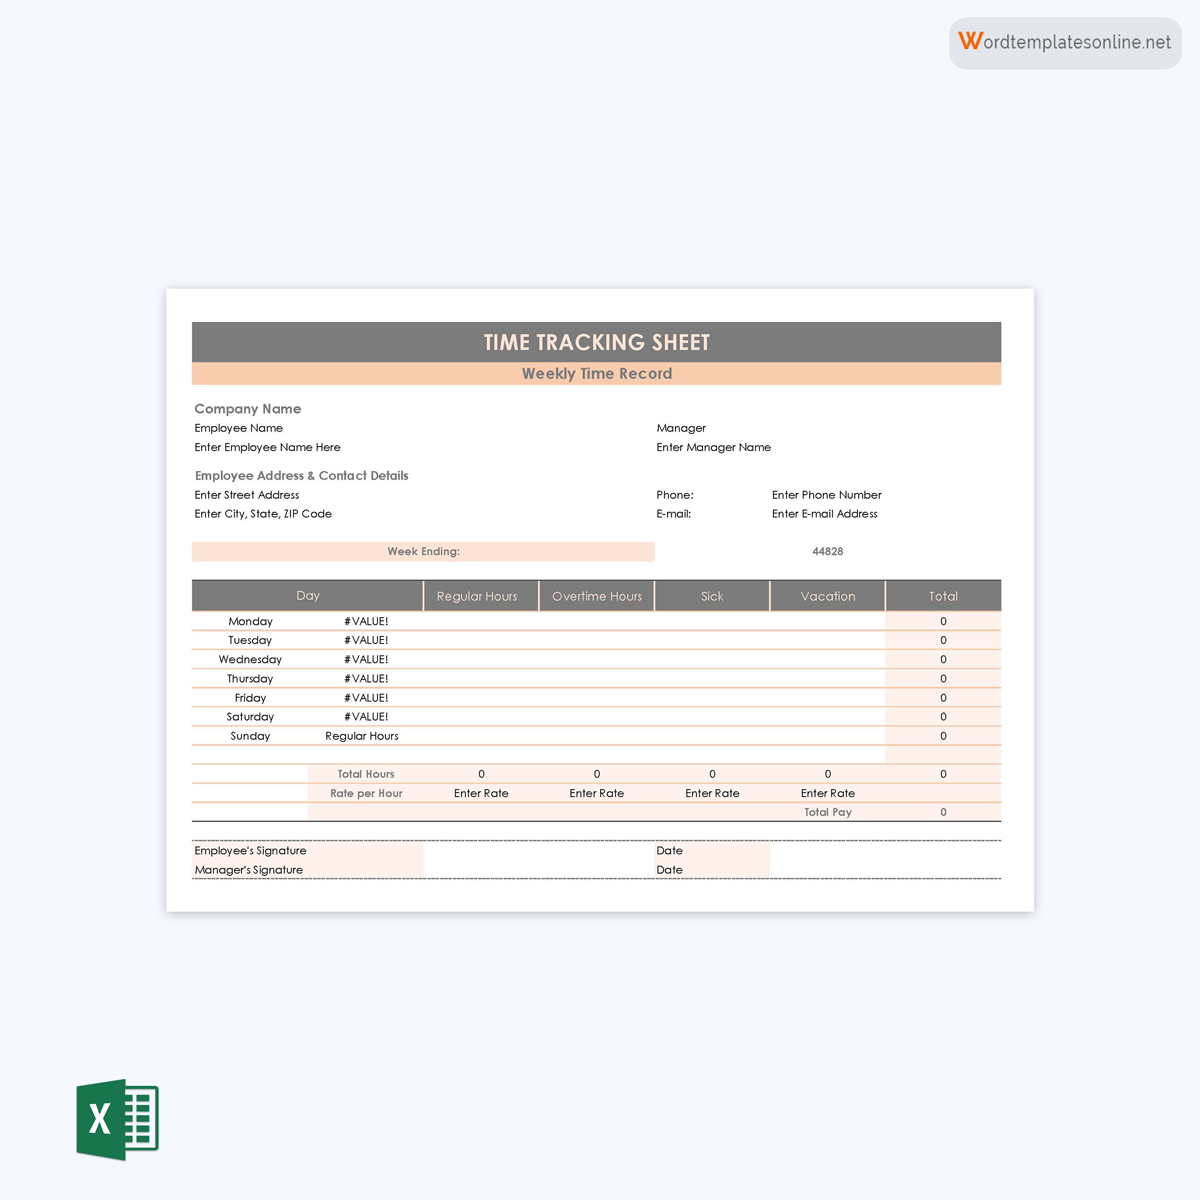 Free Customizable Time Tracking Spreadsheet Template 09 as Excel Sheet